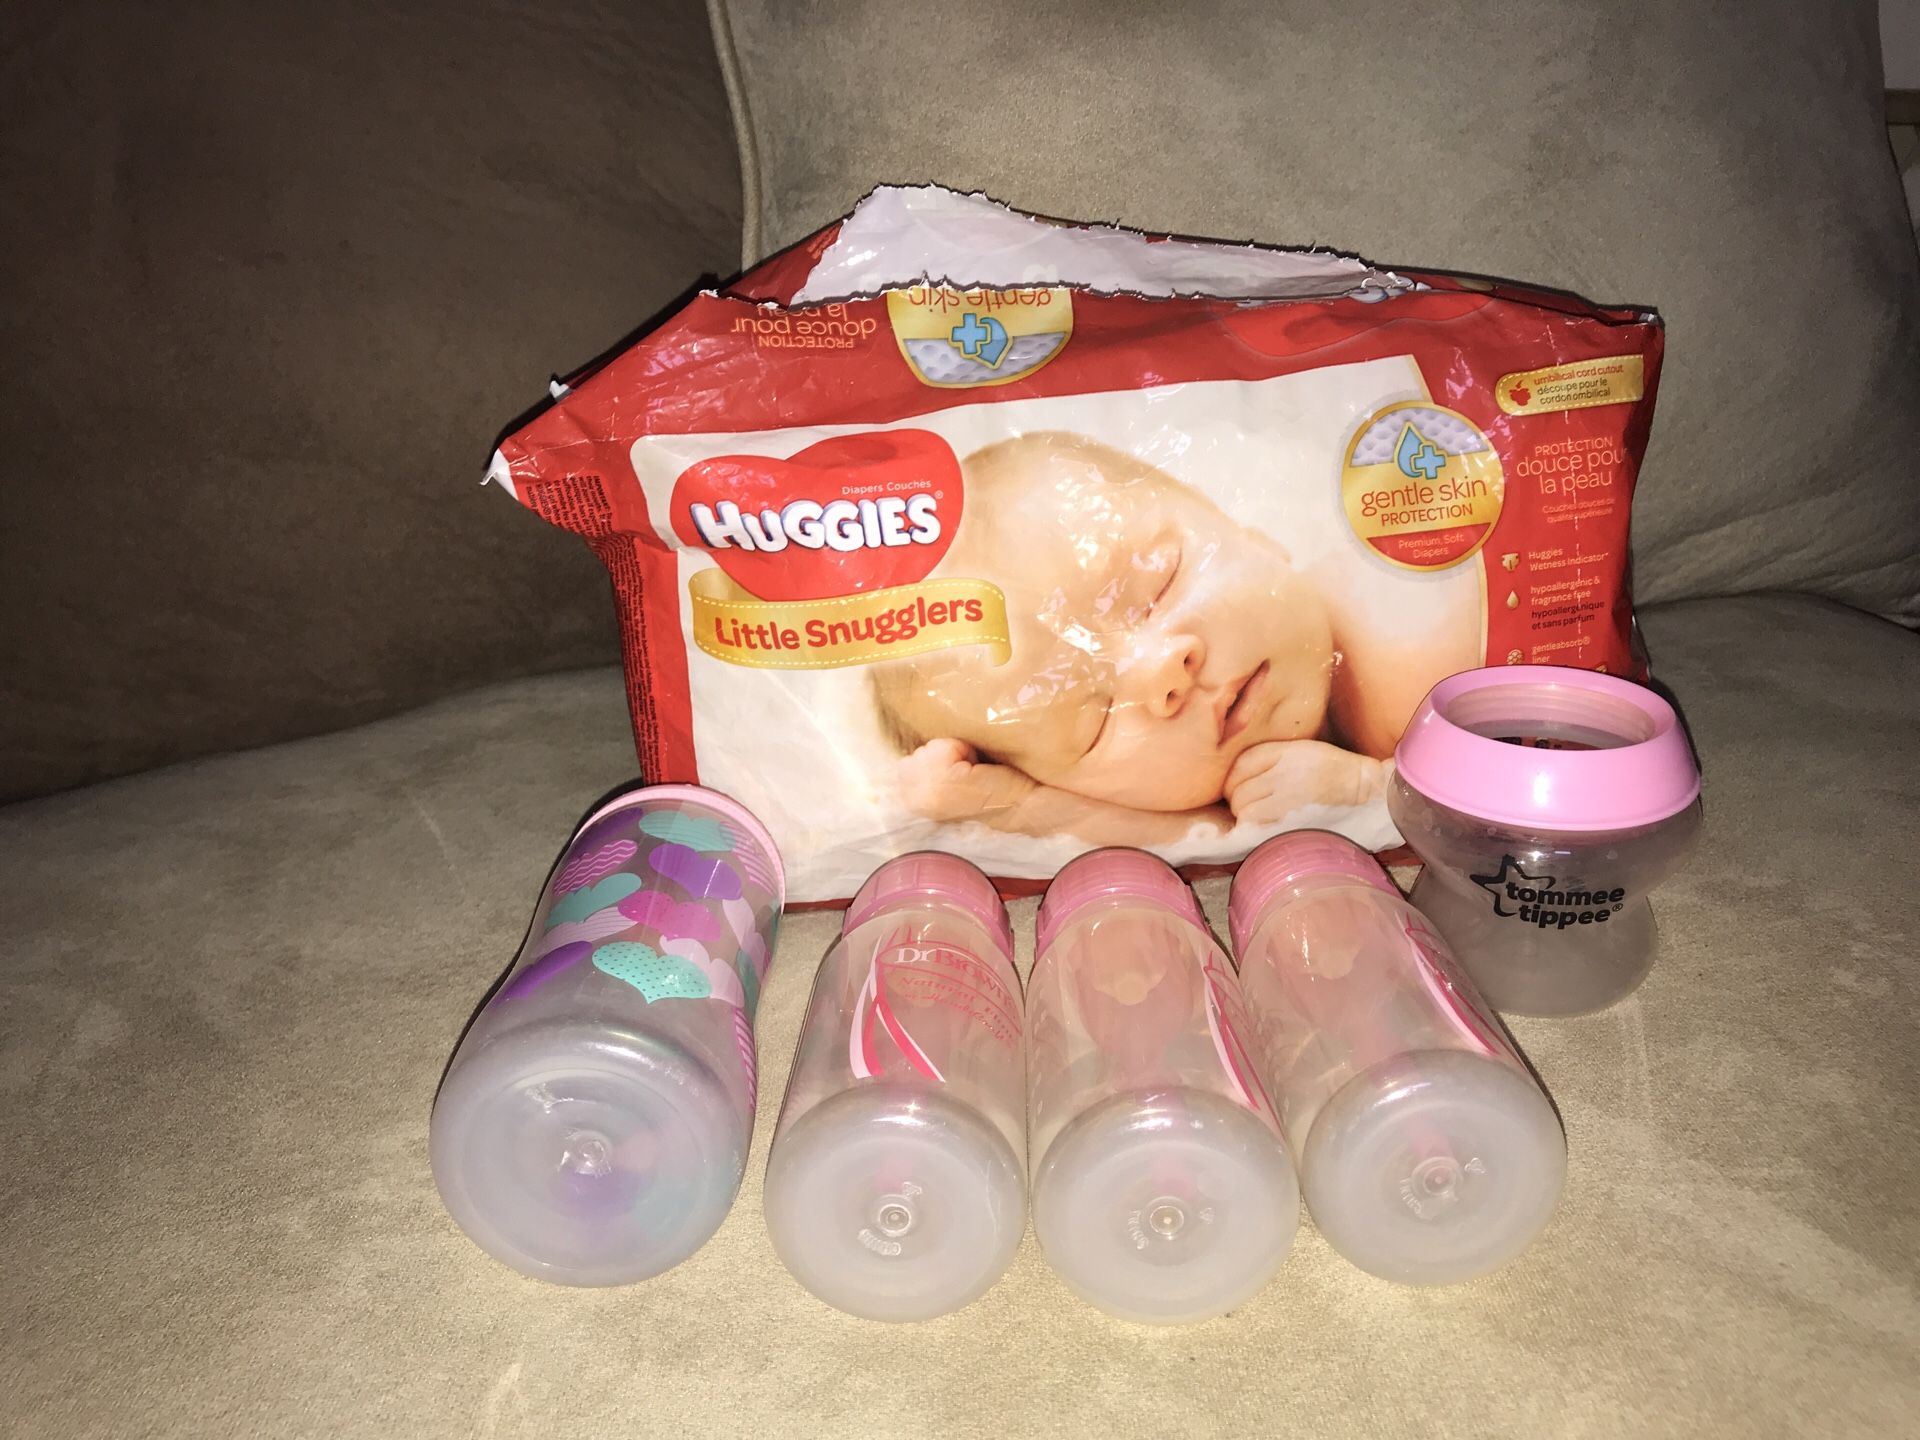 Newborn diapers and bottles